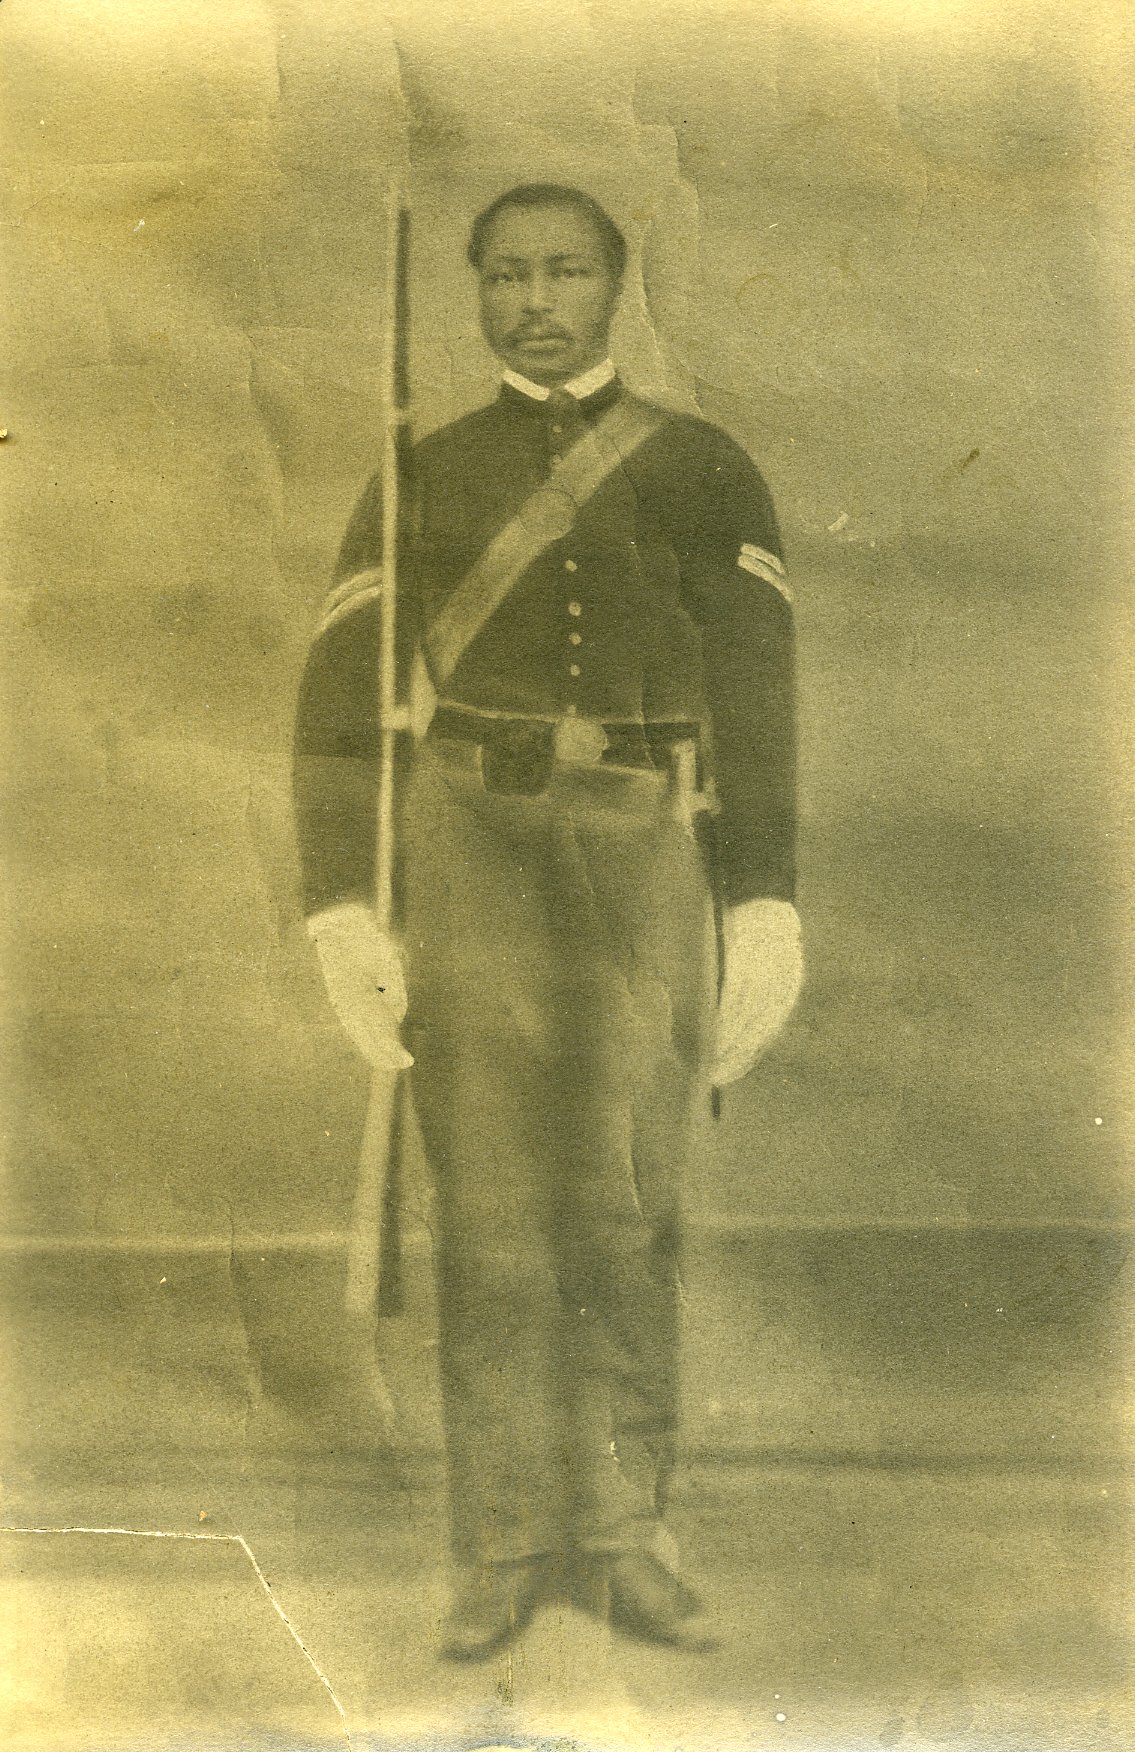 Image of Jonas Kee in uniform from the Cumberland County Historical Society Archives 